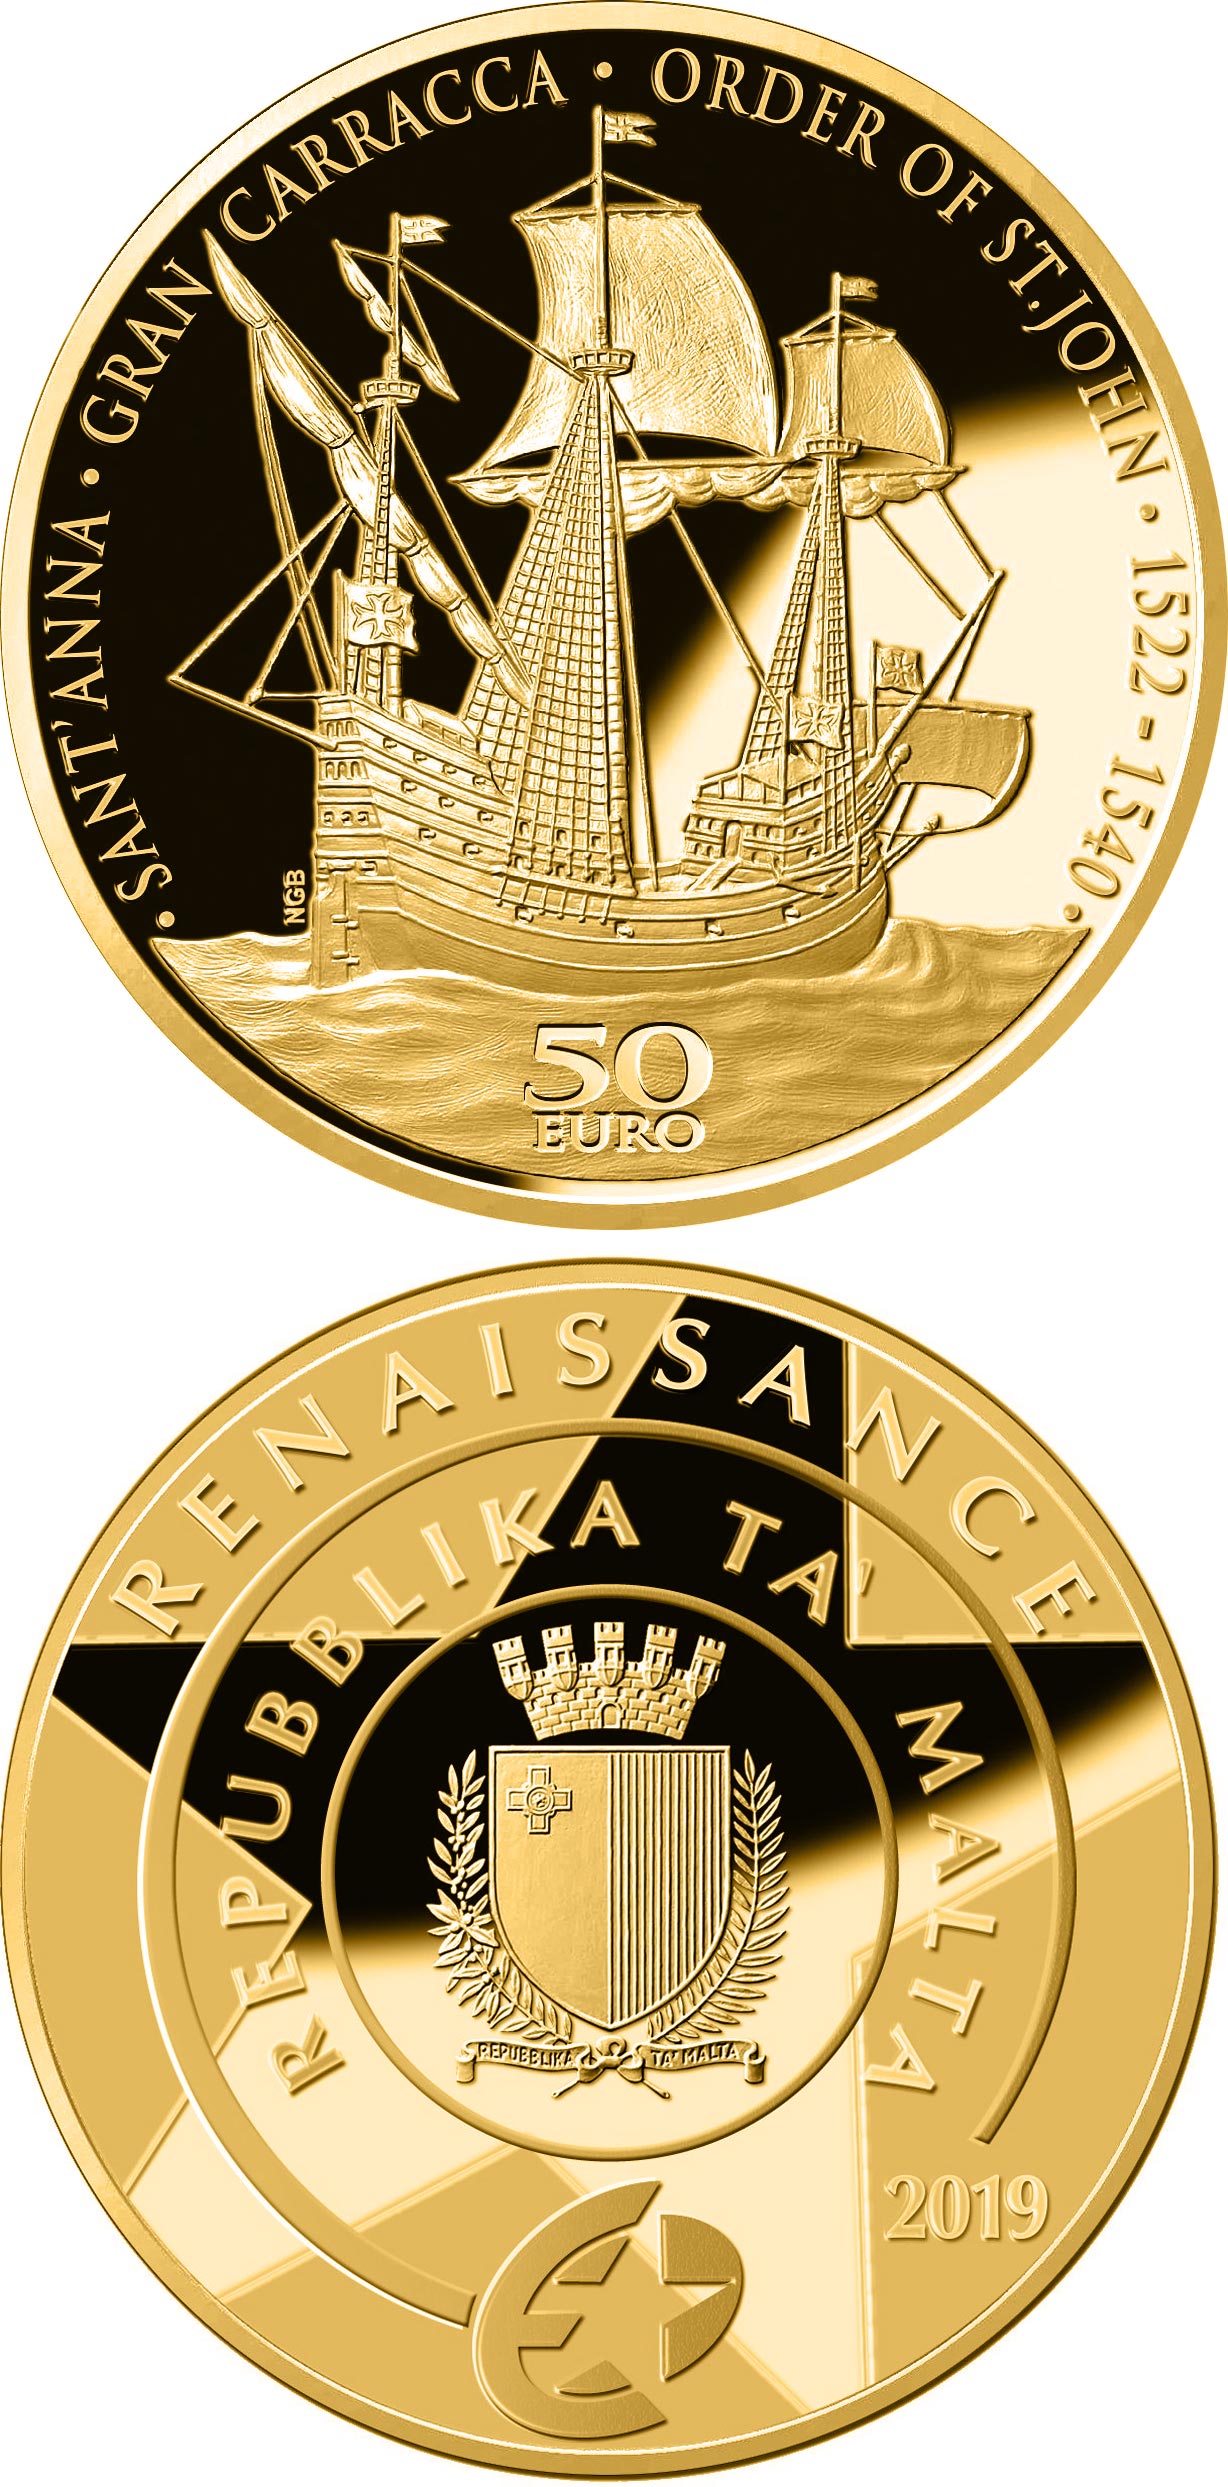 Image of 50 euro coin - The Gran Carracca of the Order of St John | Malta 2019.  The Gold coin is of Proof quality.